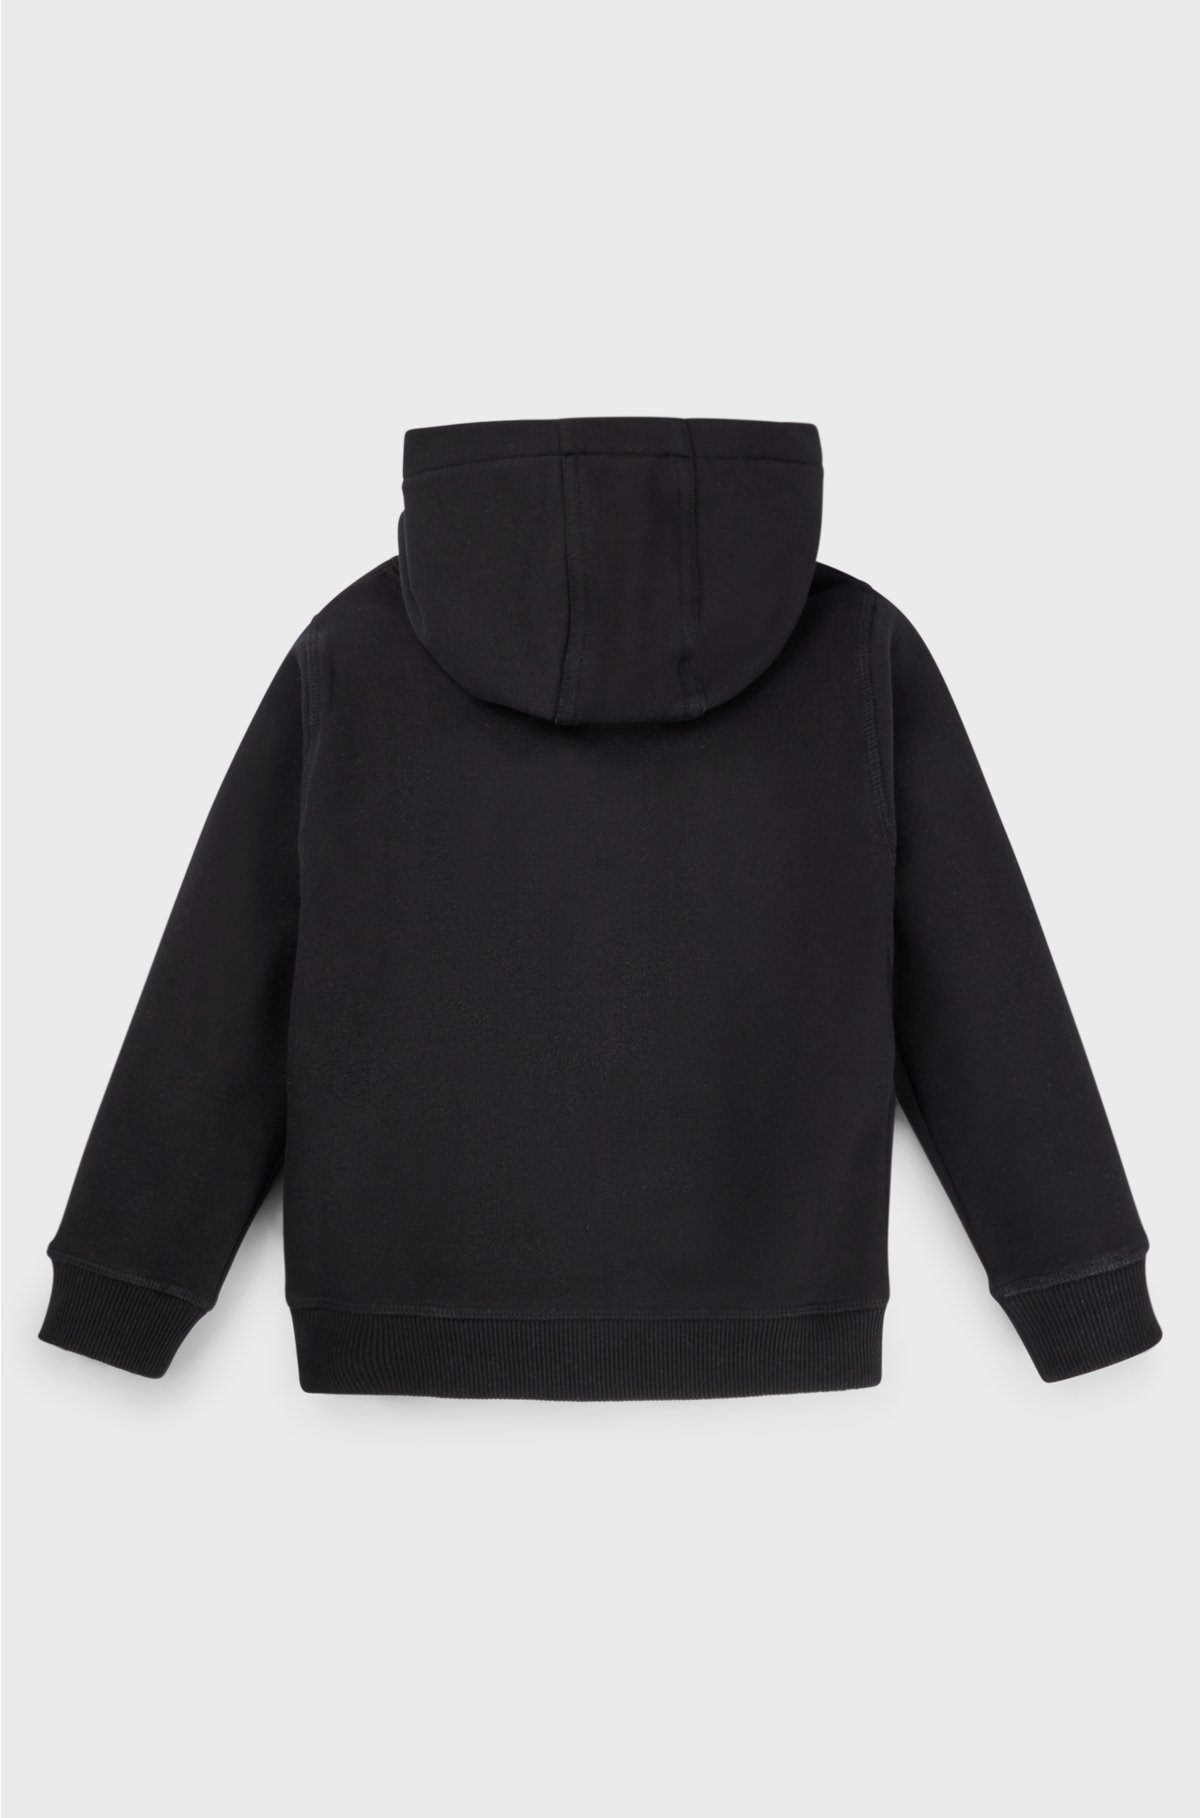 Kids' hoodie in cotton-blend fleece with stacked logo, Black